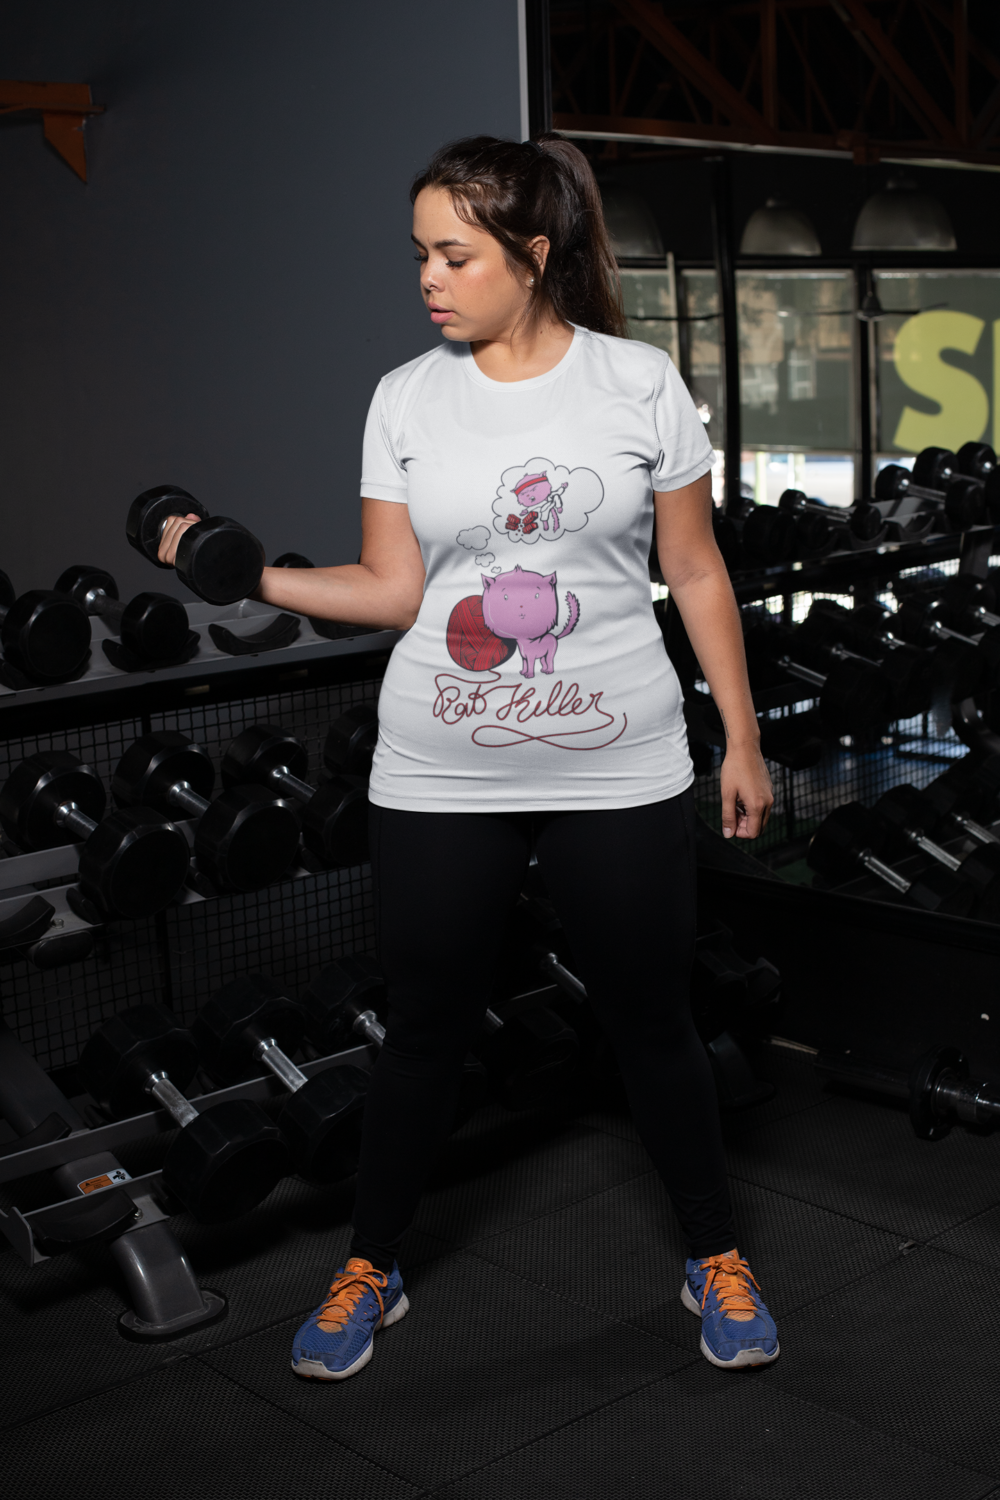 plus size t shirt mockup of a woman lifting dumbbells at the gym 30143